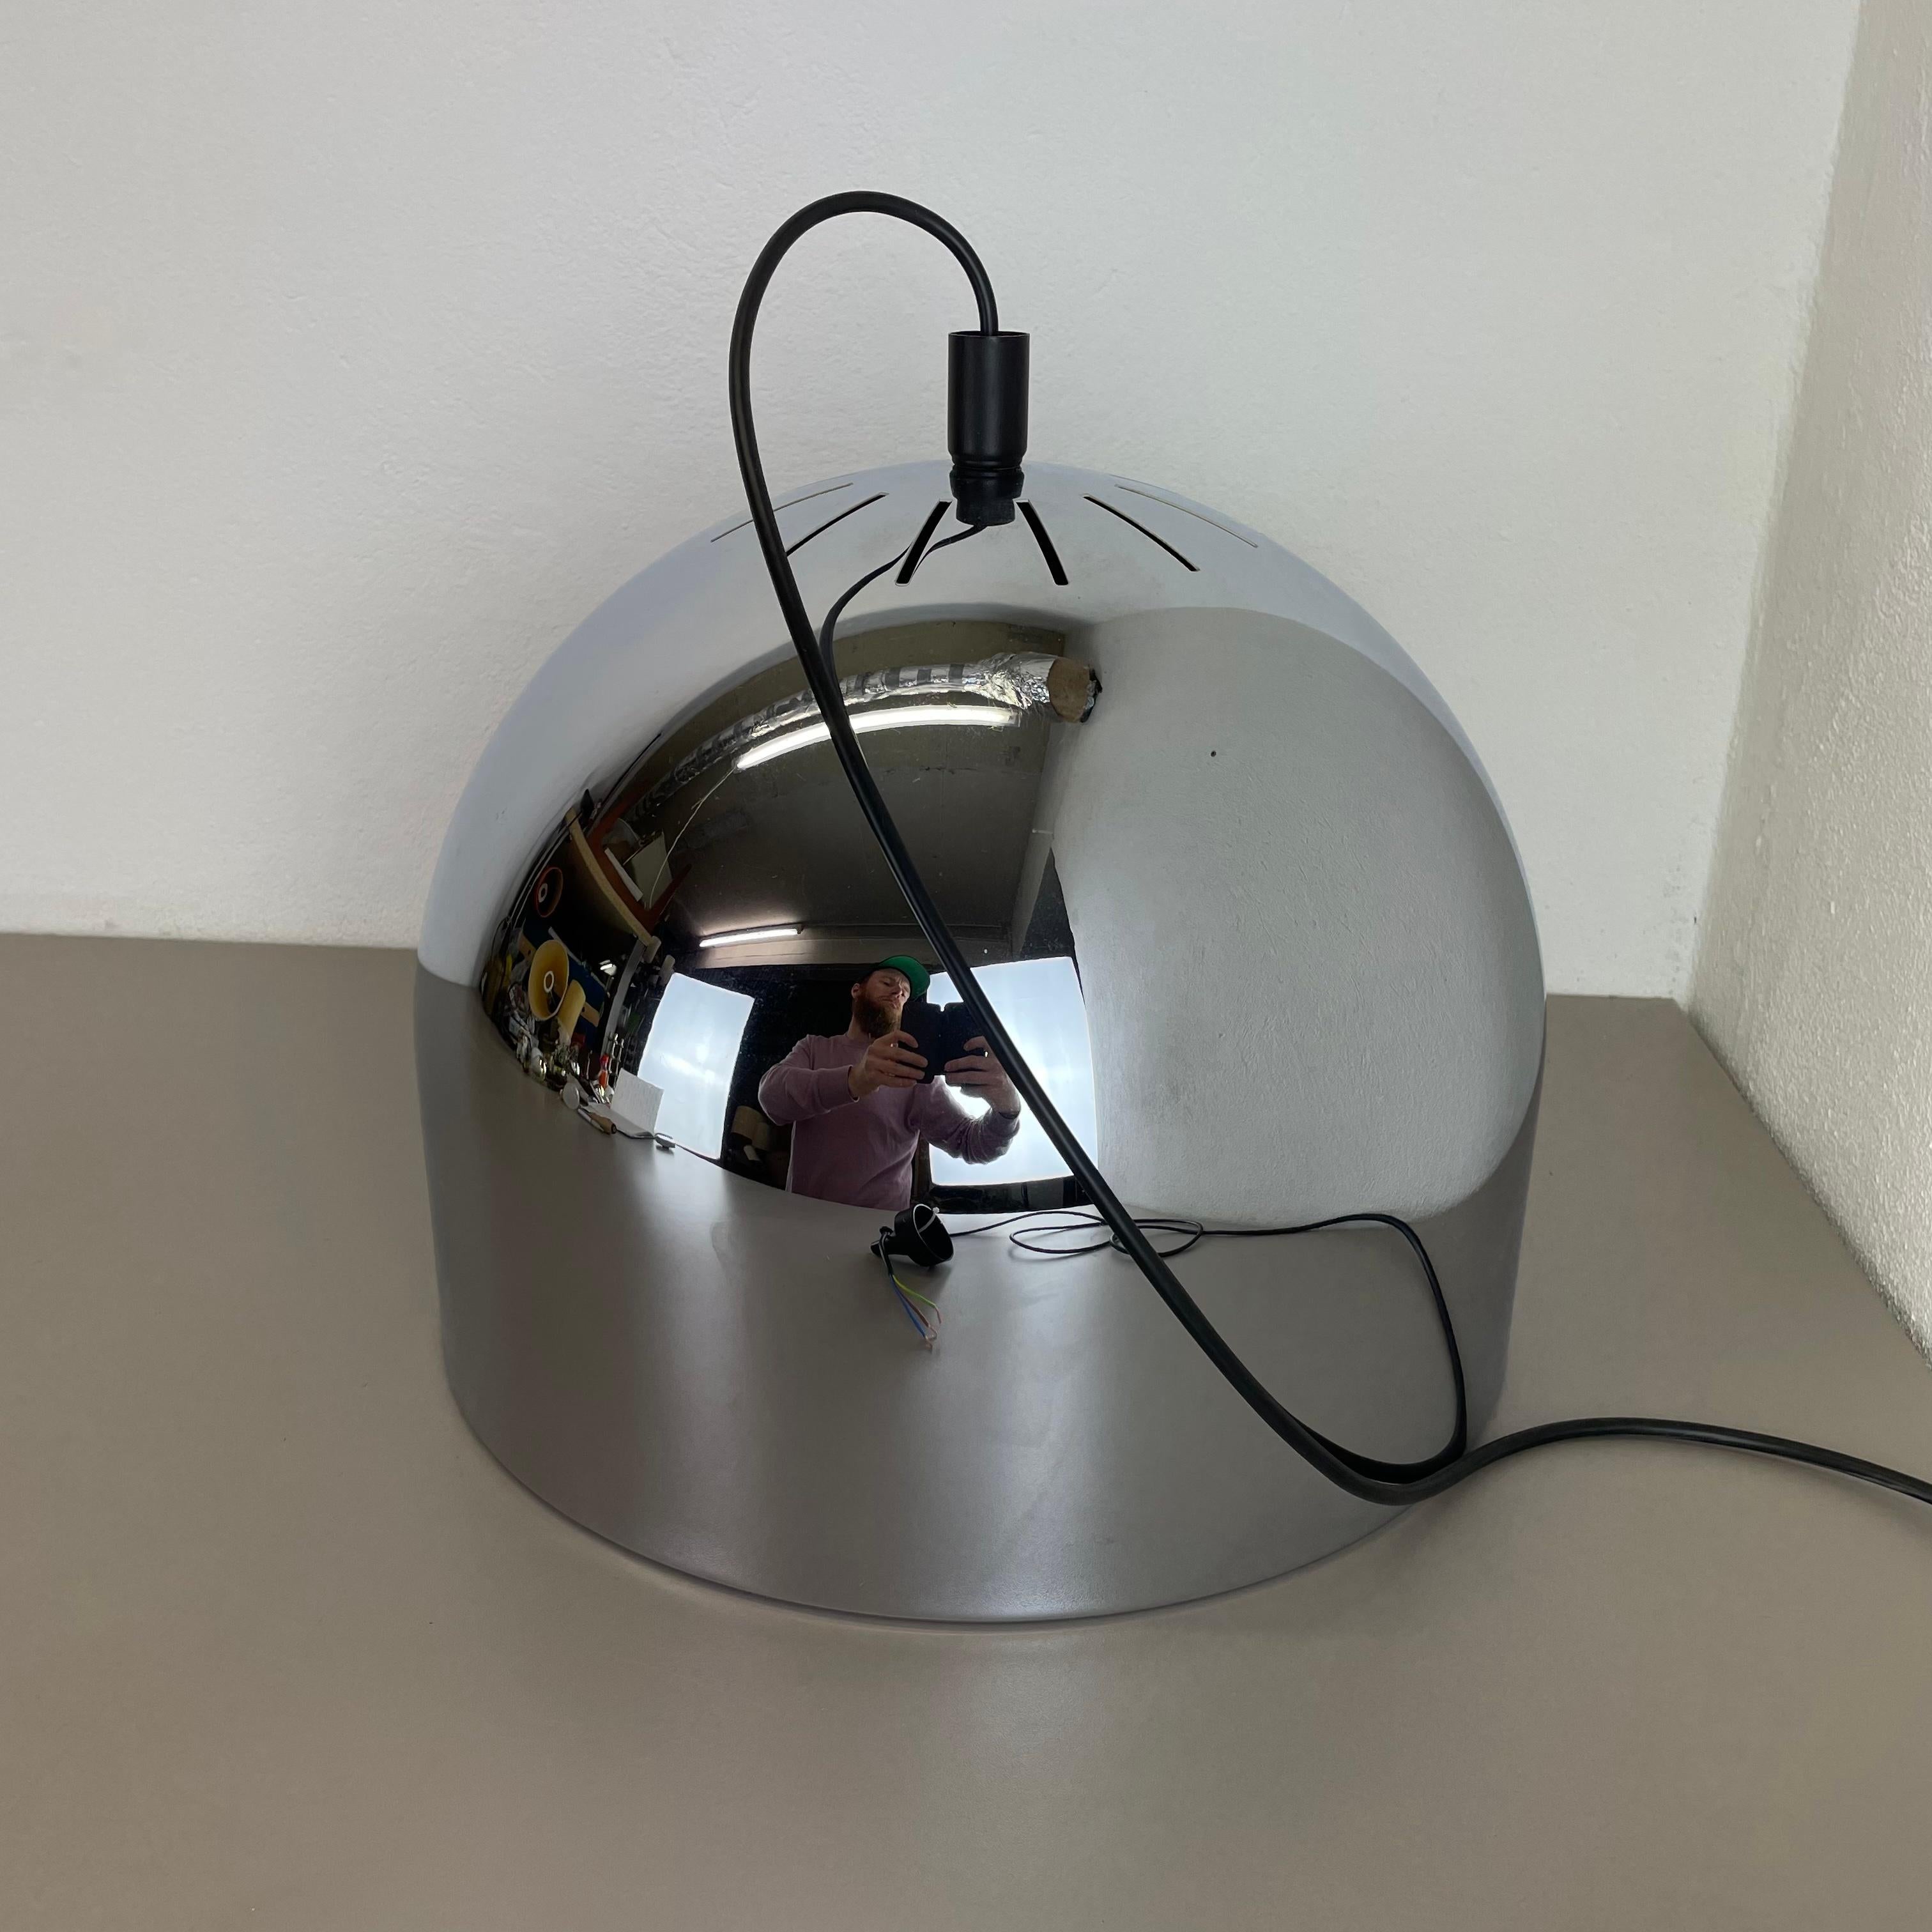 Xxl Chromed Metal Bubble Hanging Light by Rolf Krüger for Staff Lights, Germany For Sale 2